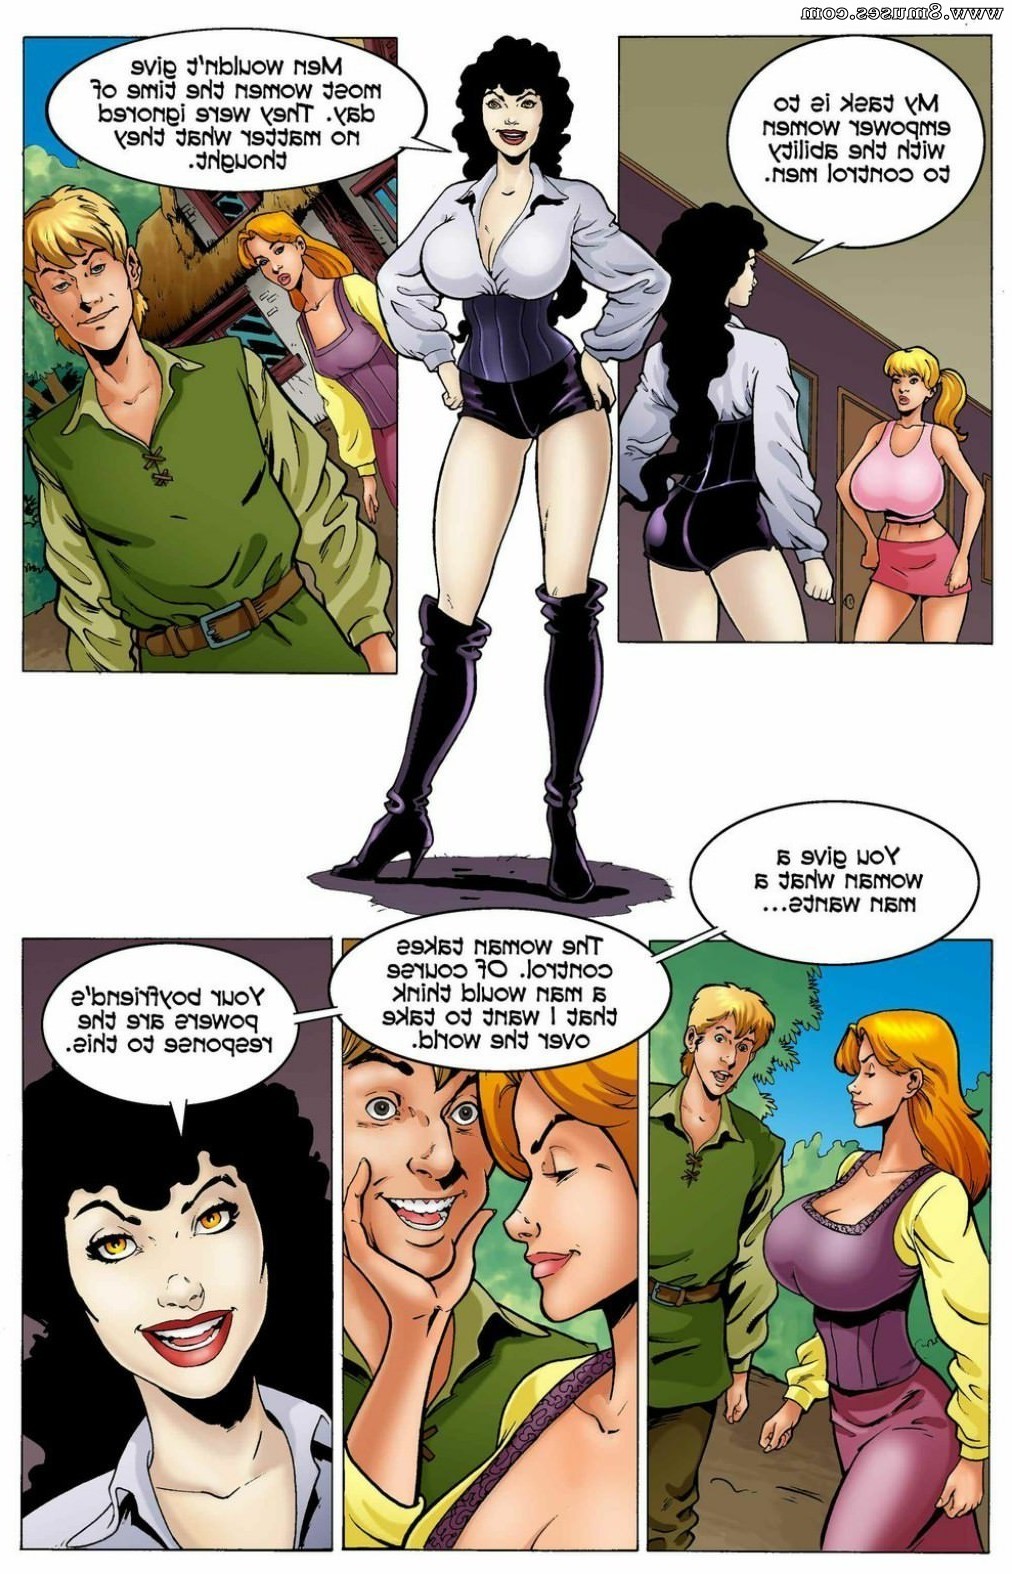 BE-Story-Club-Comics/Lilith/Issue-3 Lilith_-_Issue_3_8.jpg